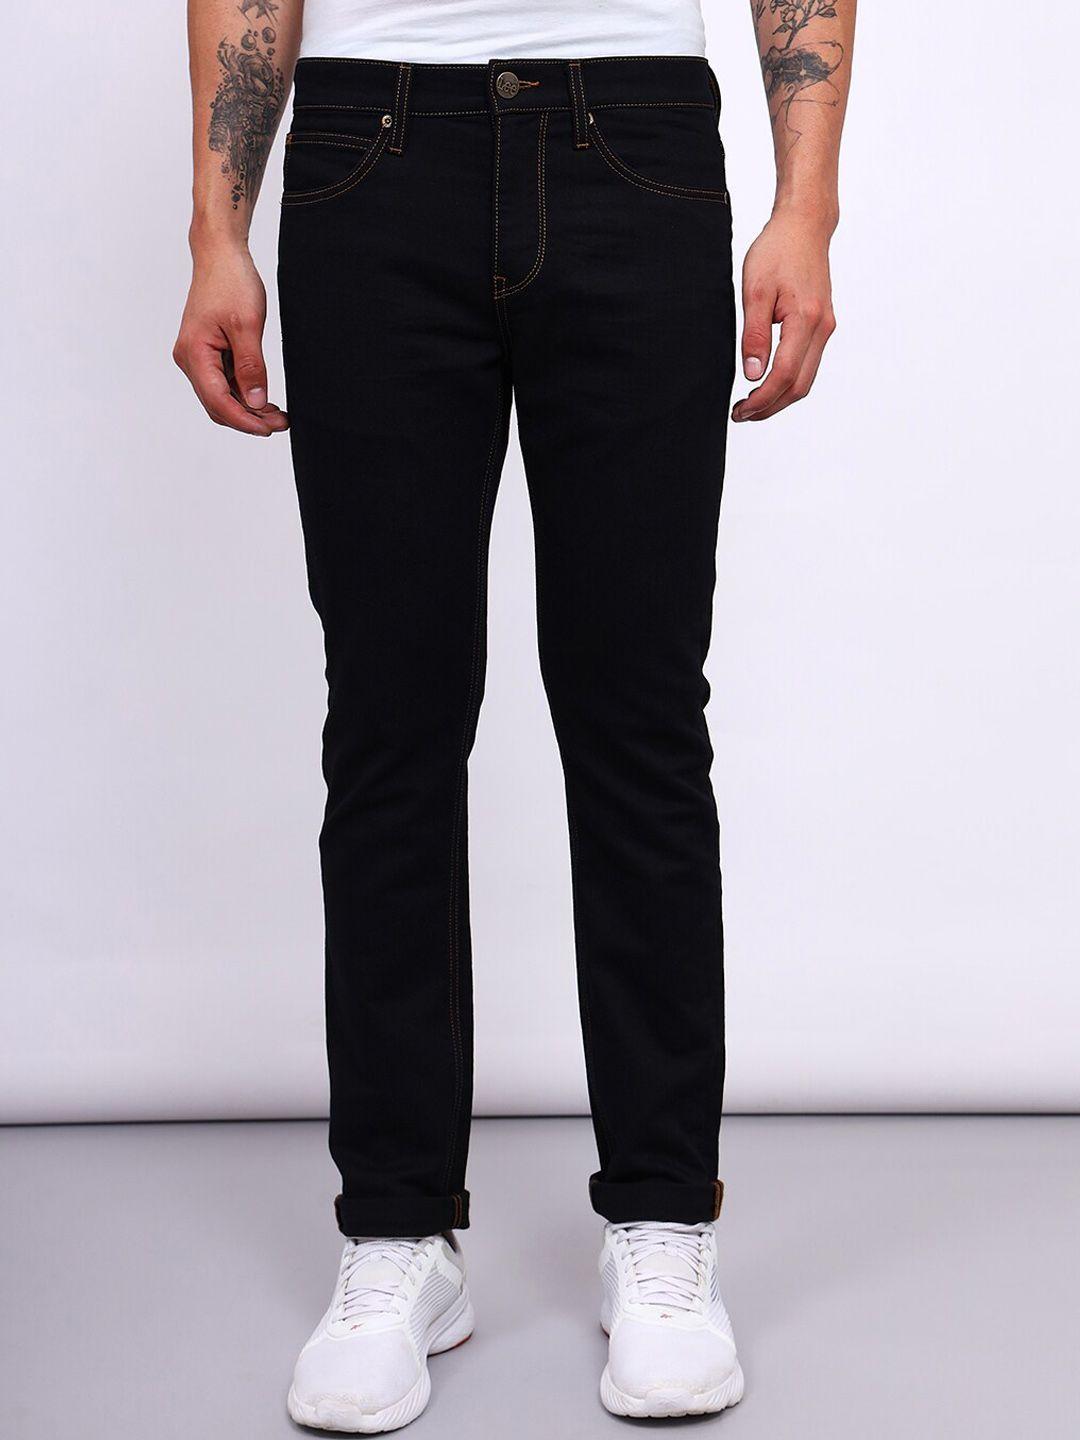 lee men slim fit rodeo stretchable jeans